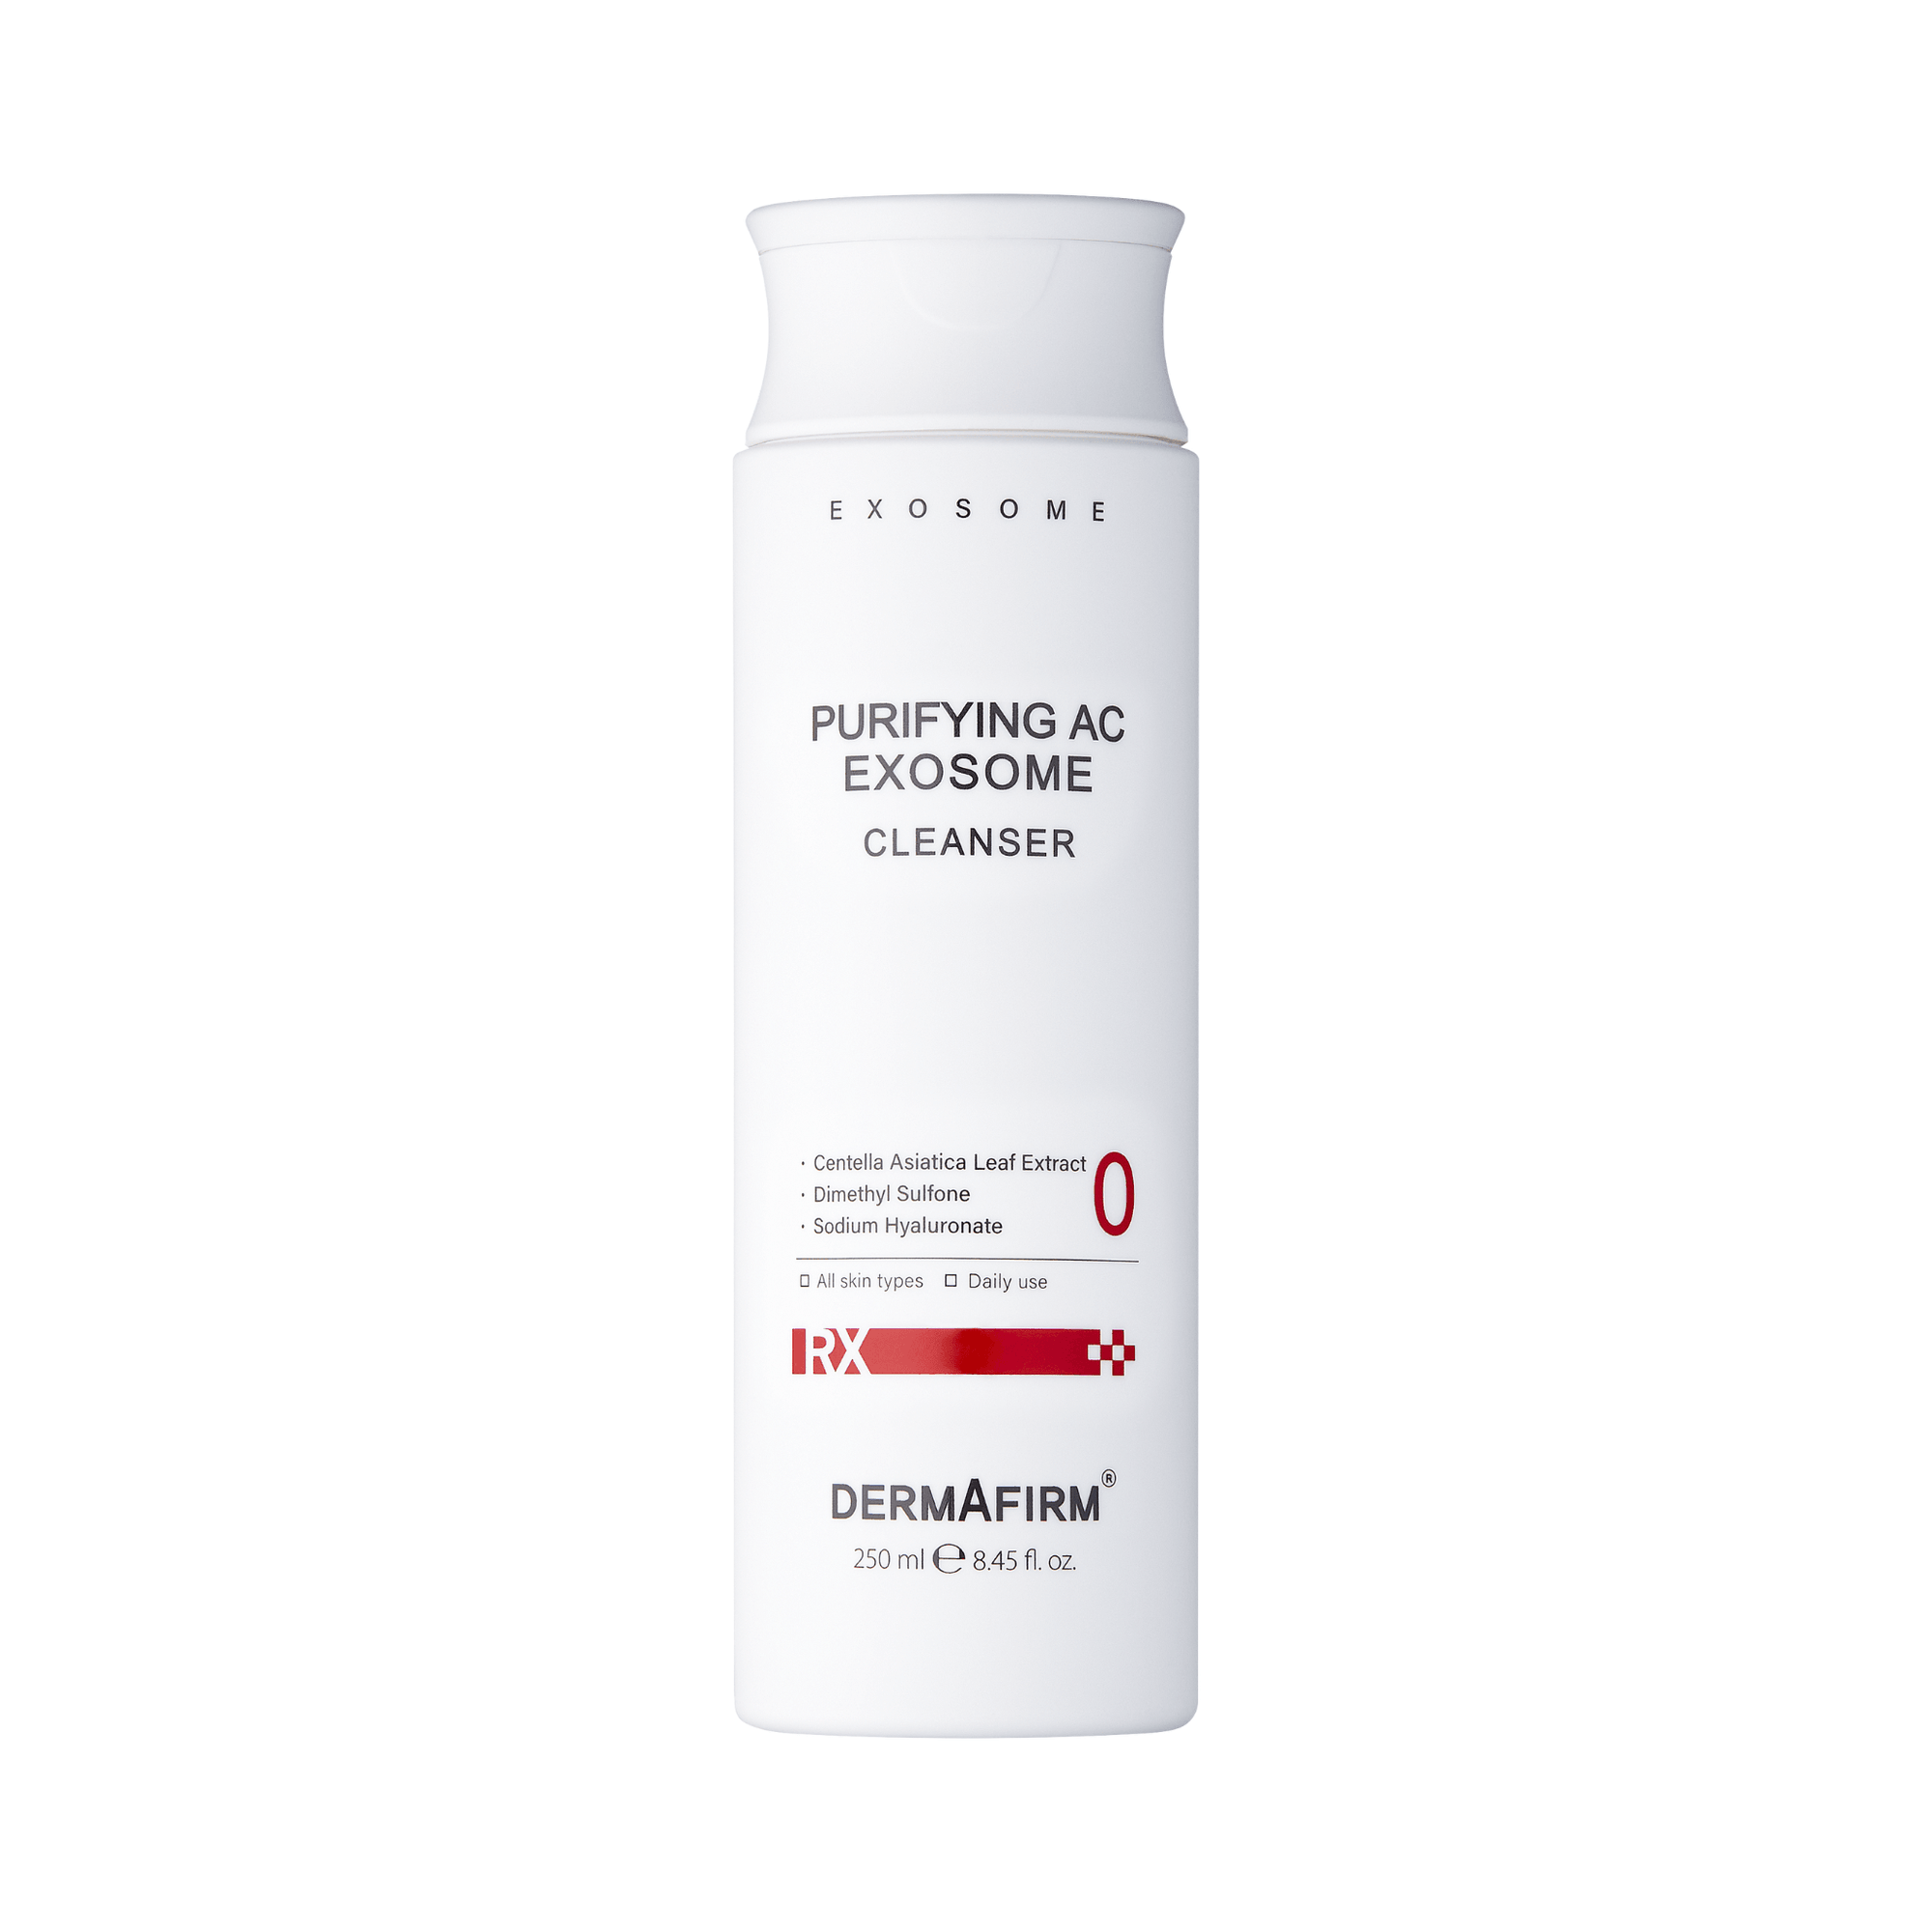 RX Purifying AC Exosome Cleanser - 250ml - Dermafirm USA